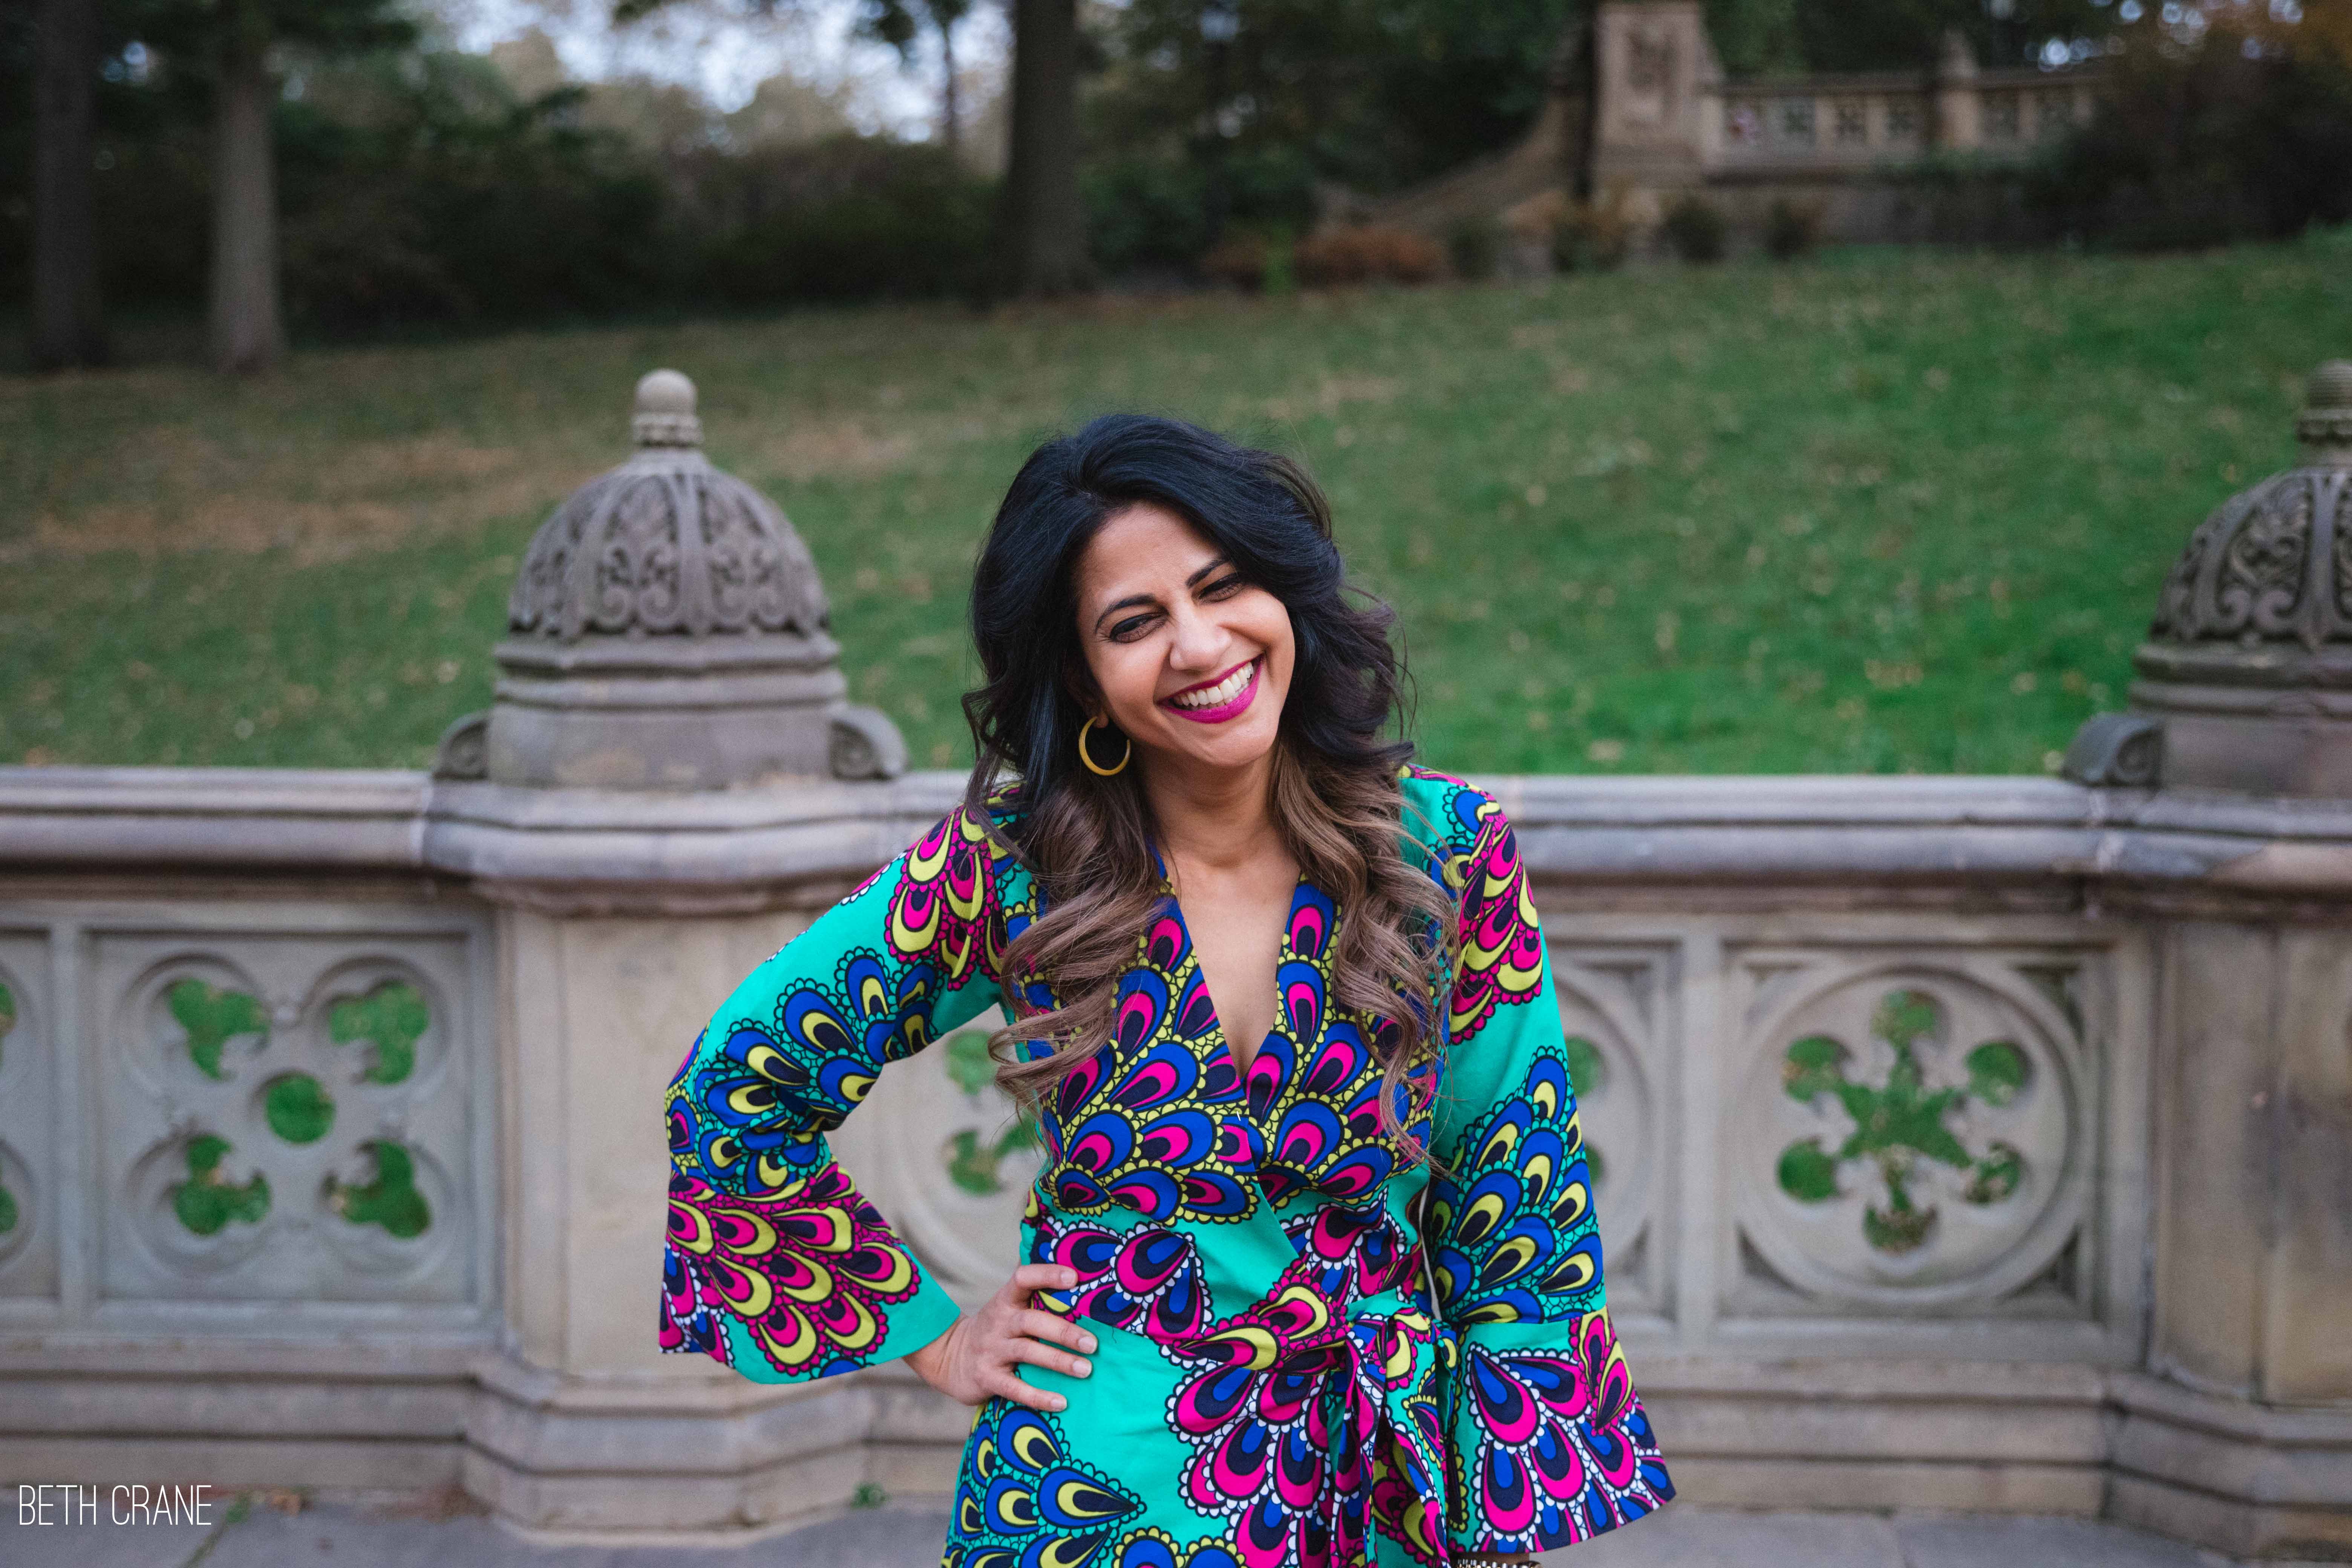 Sangeeta Mudnal finds the intersection of technology, fashion, and philanthropy